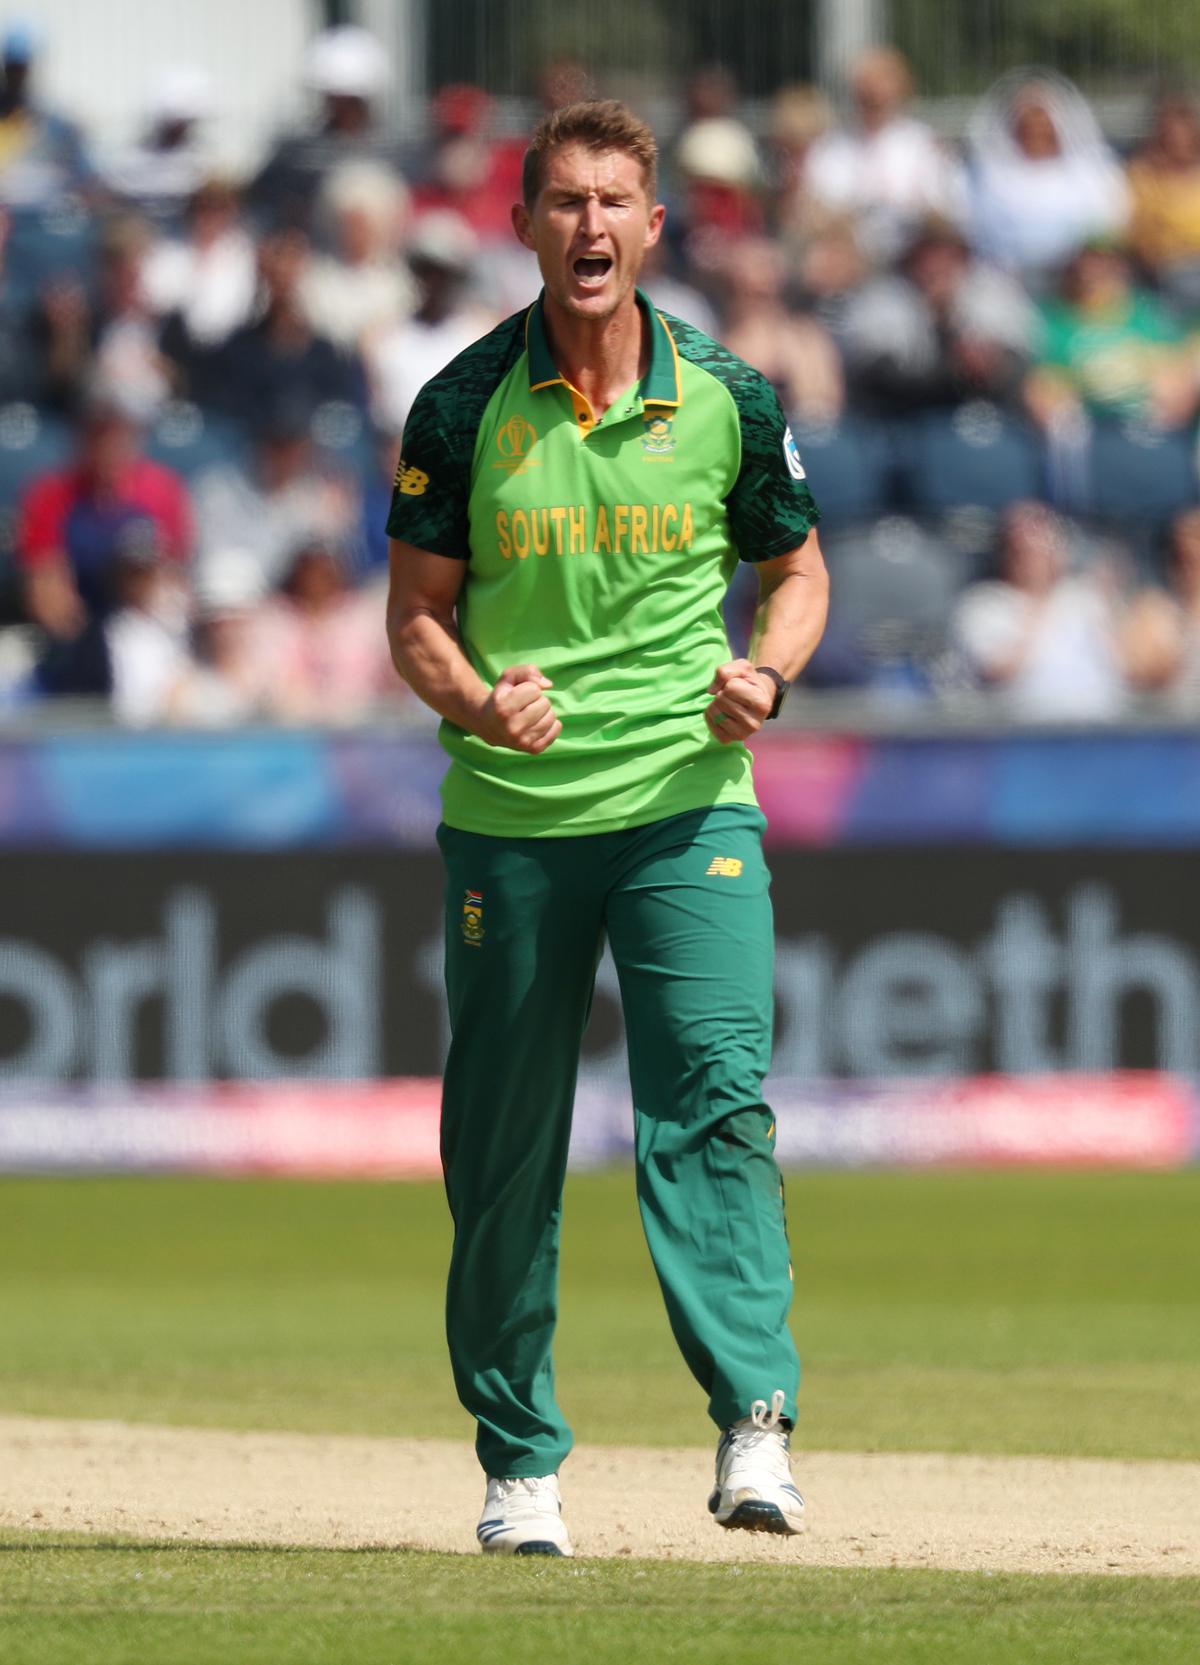 South Africa’s Pretorius ruled out of T20 World Cup